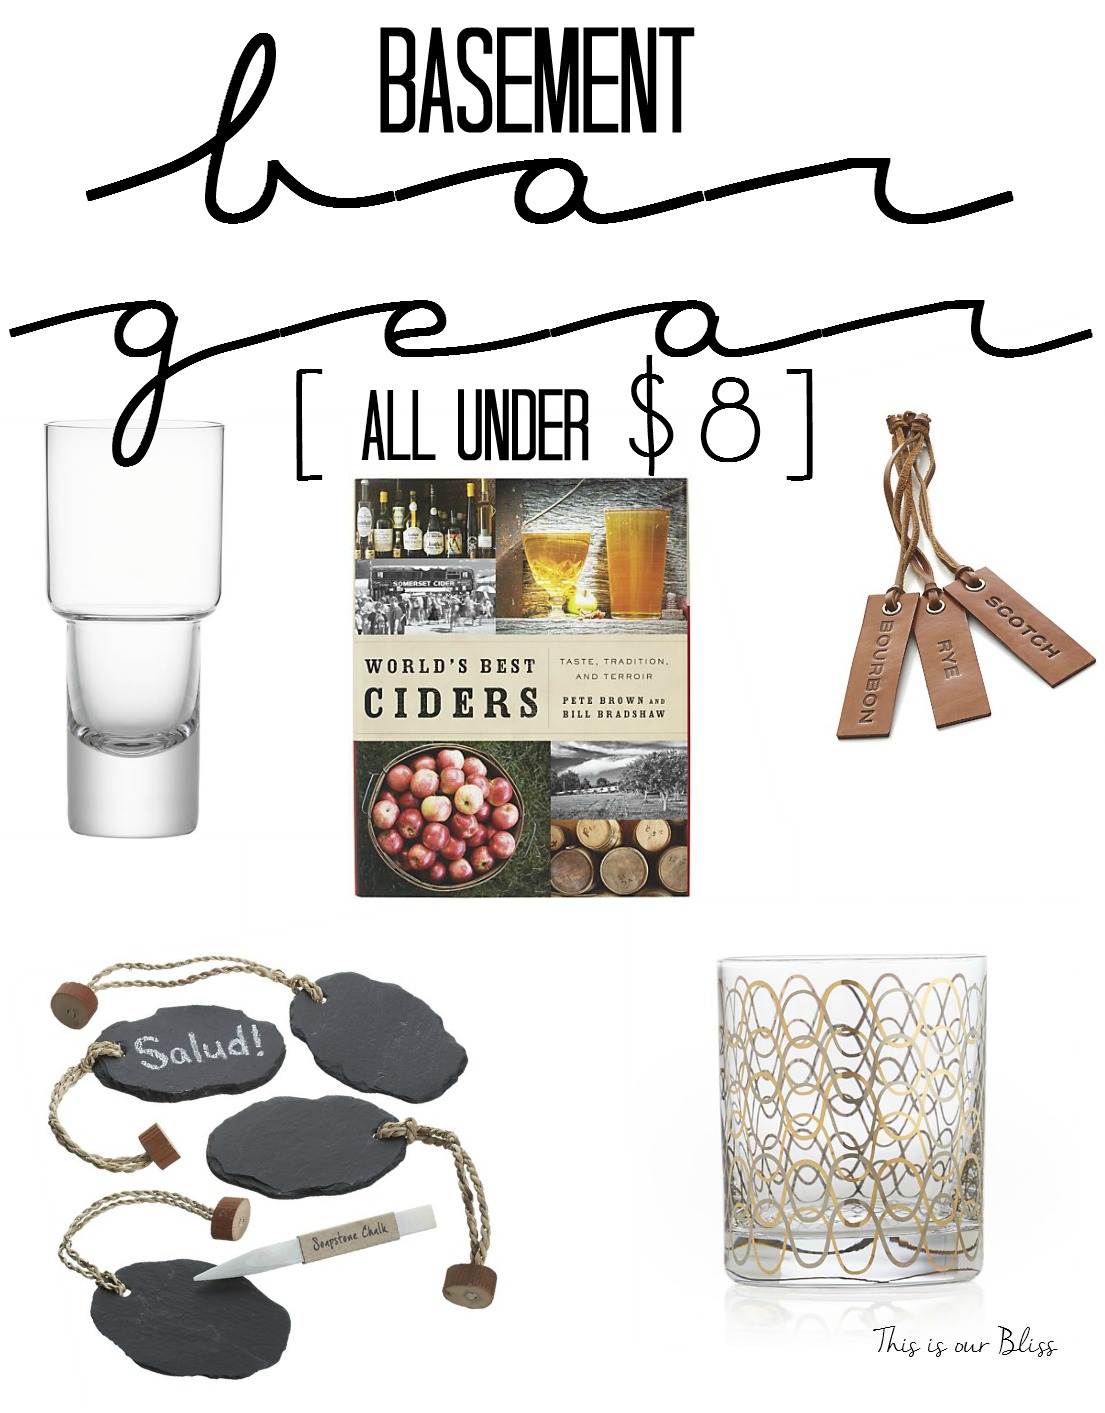 5 fab friday finds - basement bar gear - bar accessories -under $8 - father's day gift ideas - crate & barrel - this is our bliss